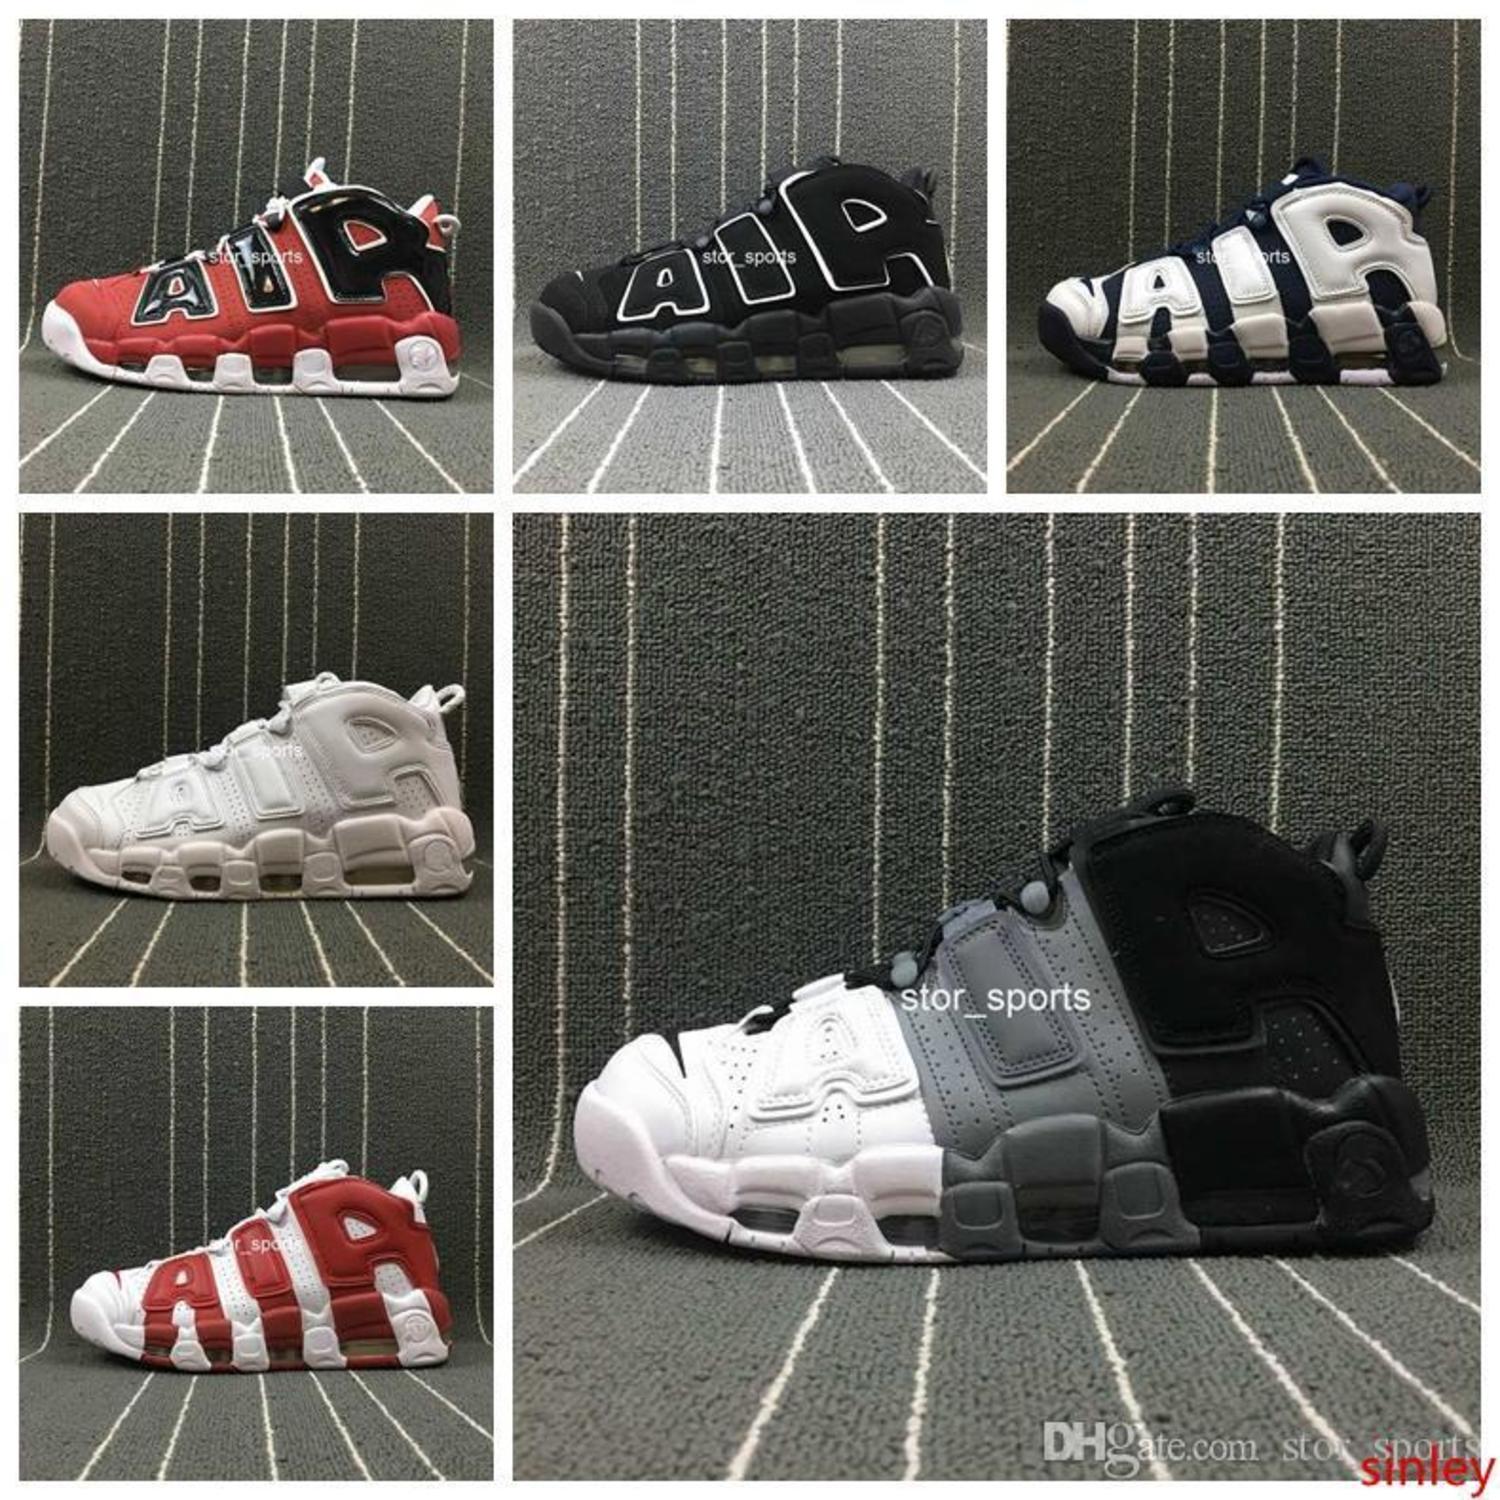 Discount Air More Uptempo | Air More Uptempo 2020 on Sale at DHgate.com